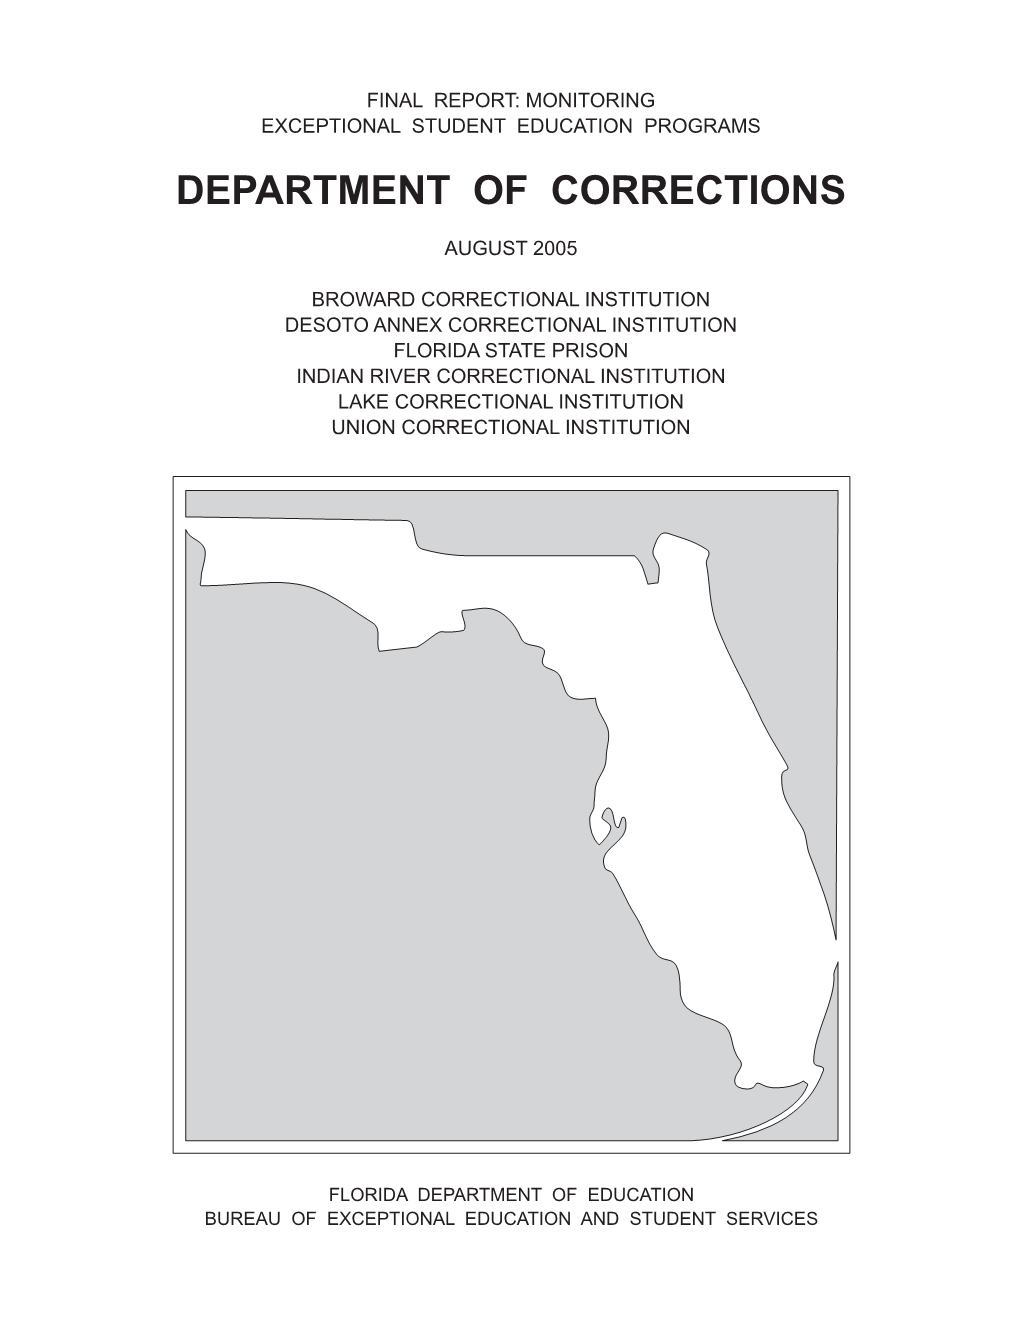 Florida Department of Corrections Final Monitoring Report August 2005